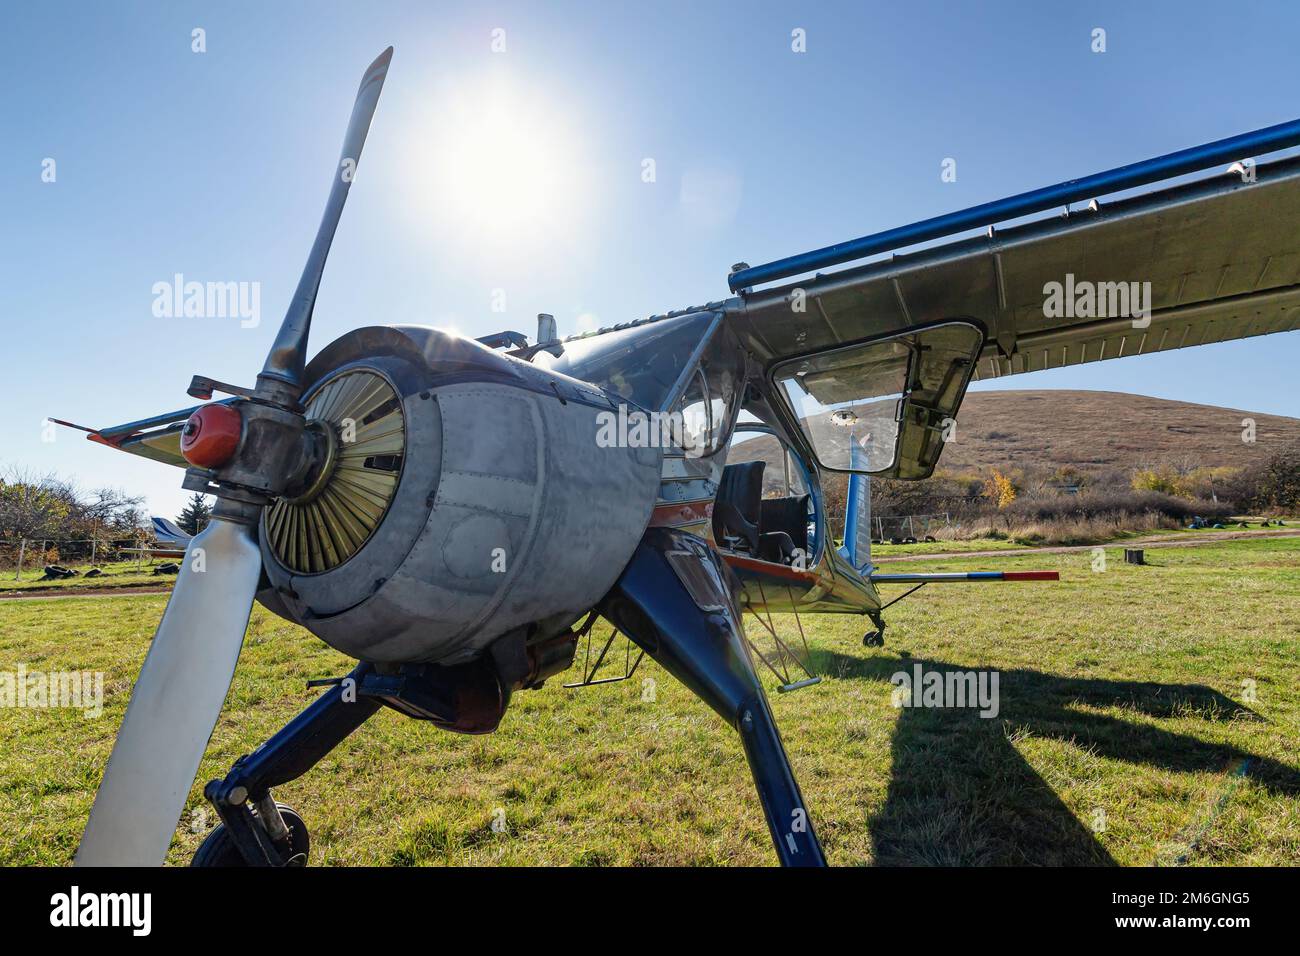 A small light-engine aircraft stands on a field airfield Stock Photo